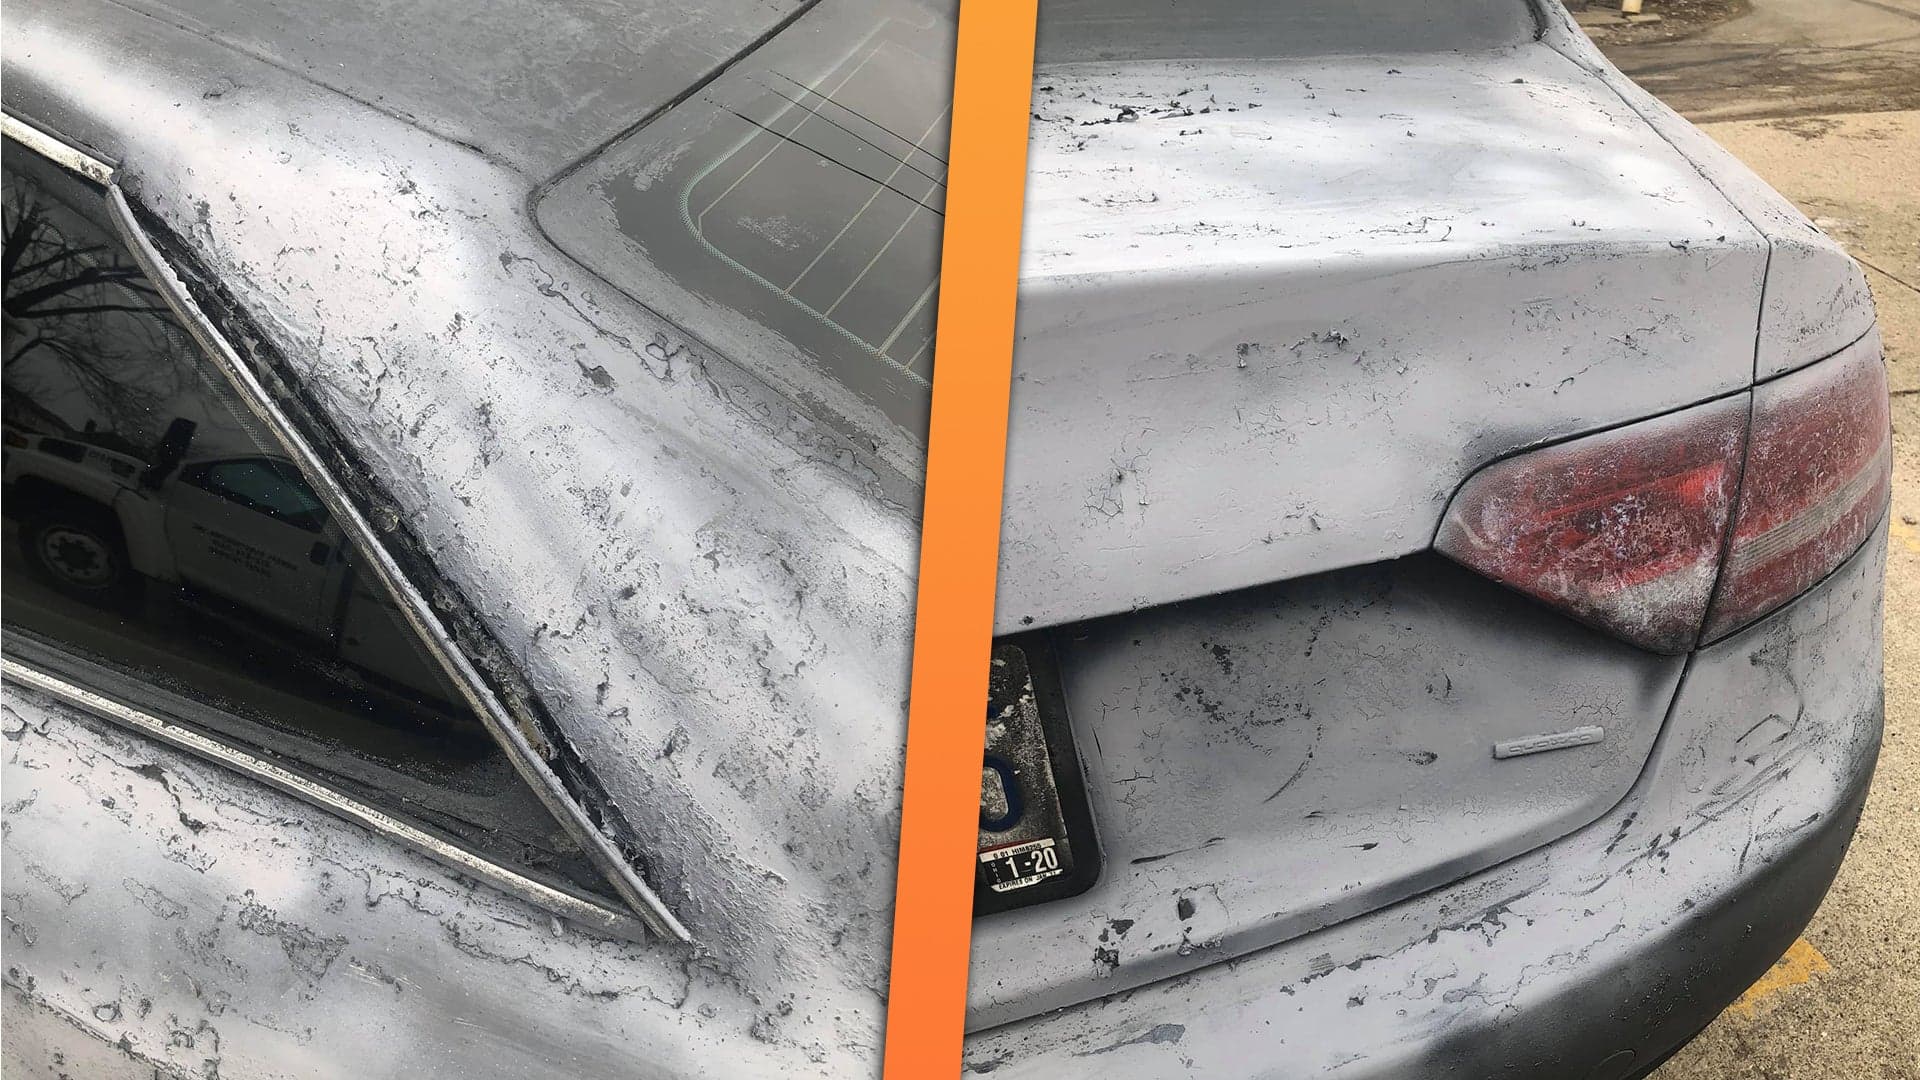 Behold the Disastrous Result of Using Paint Stripper on a Plasti Dipped Car